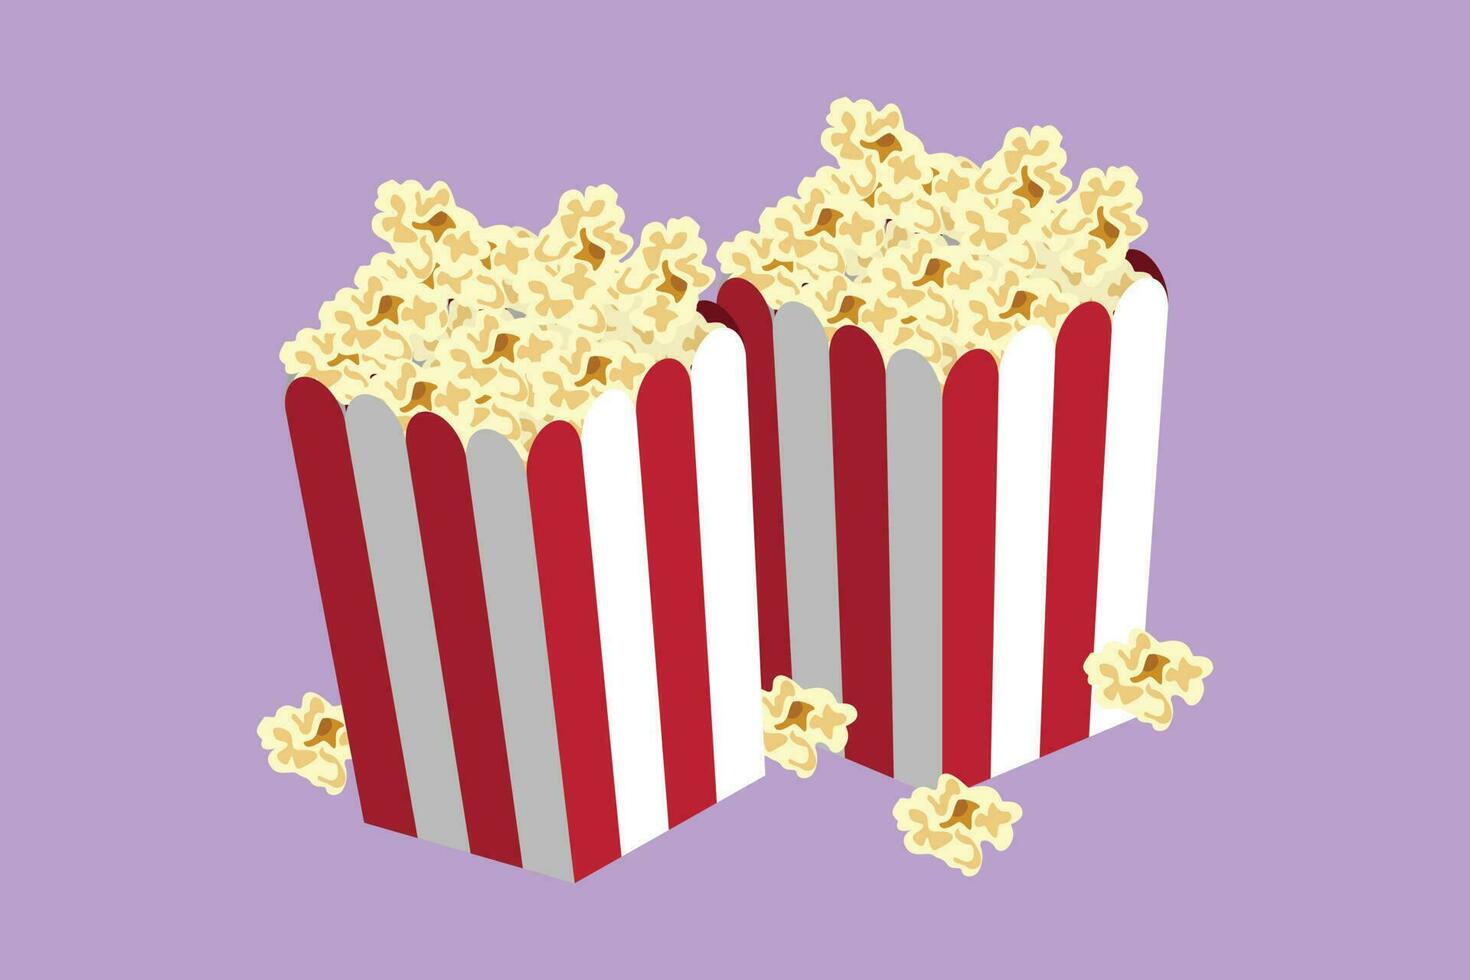 https://static.vecteezy.com/system/resources/previews/023/603/198/non_2x/character-flat-drawing-fresh-sweet-delicious-pop-corn-with-stripped-pattern-paper-box-snack-for-watching-movies-concept-logo-for-cafe-shop-food-delivery-service-cartoon-design-illustration-vector.jpg